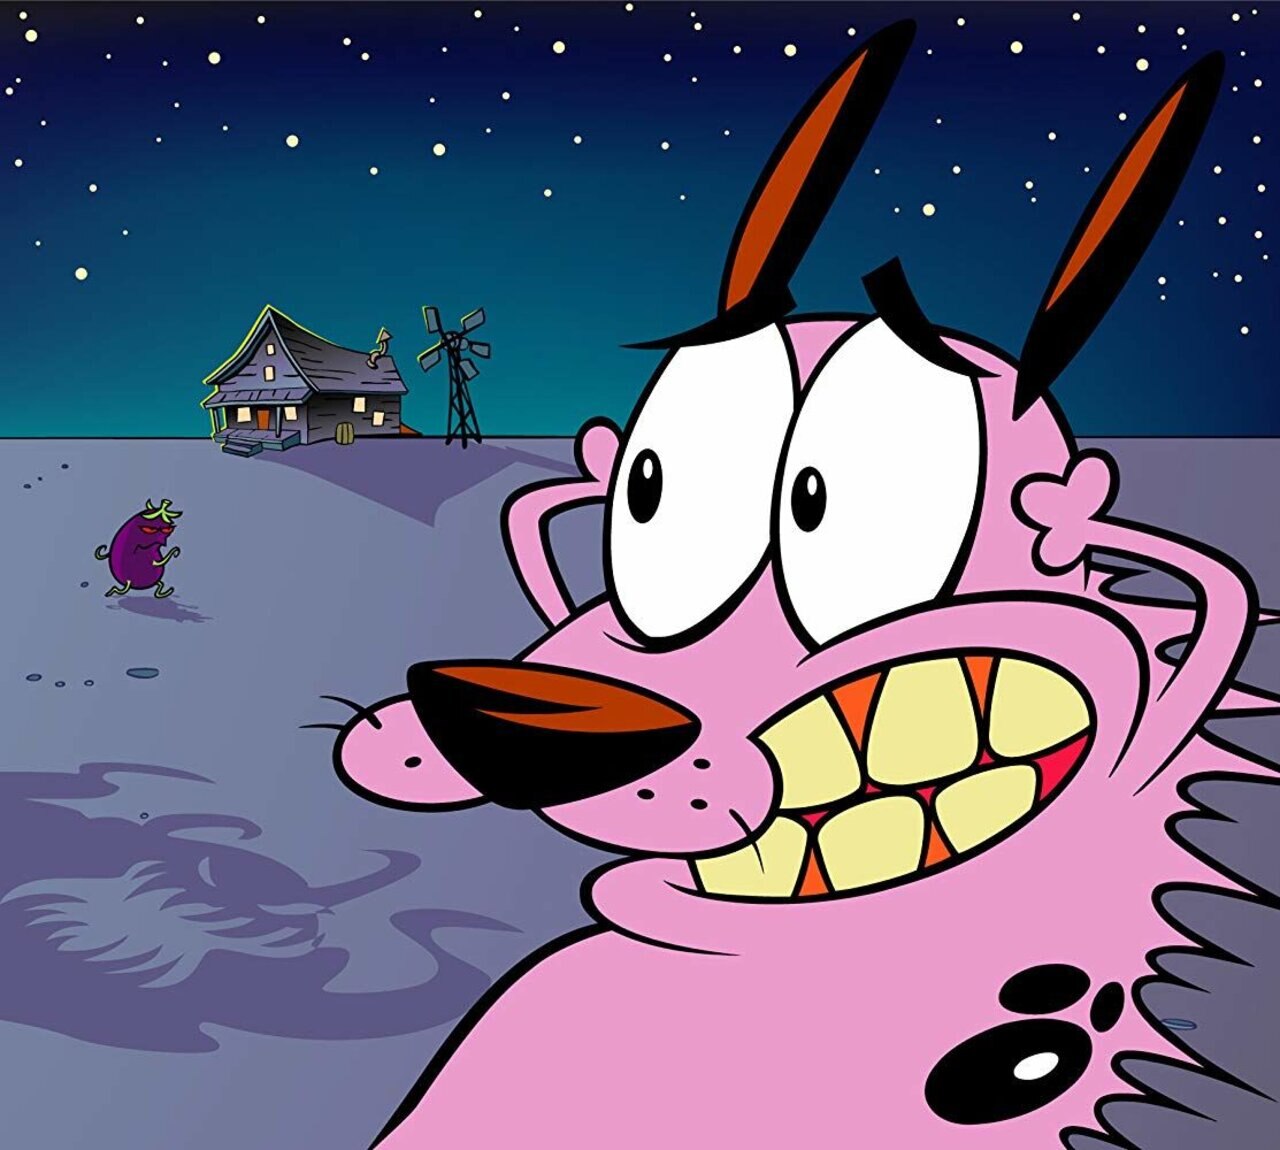 Courage the cowardly dog true